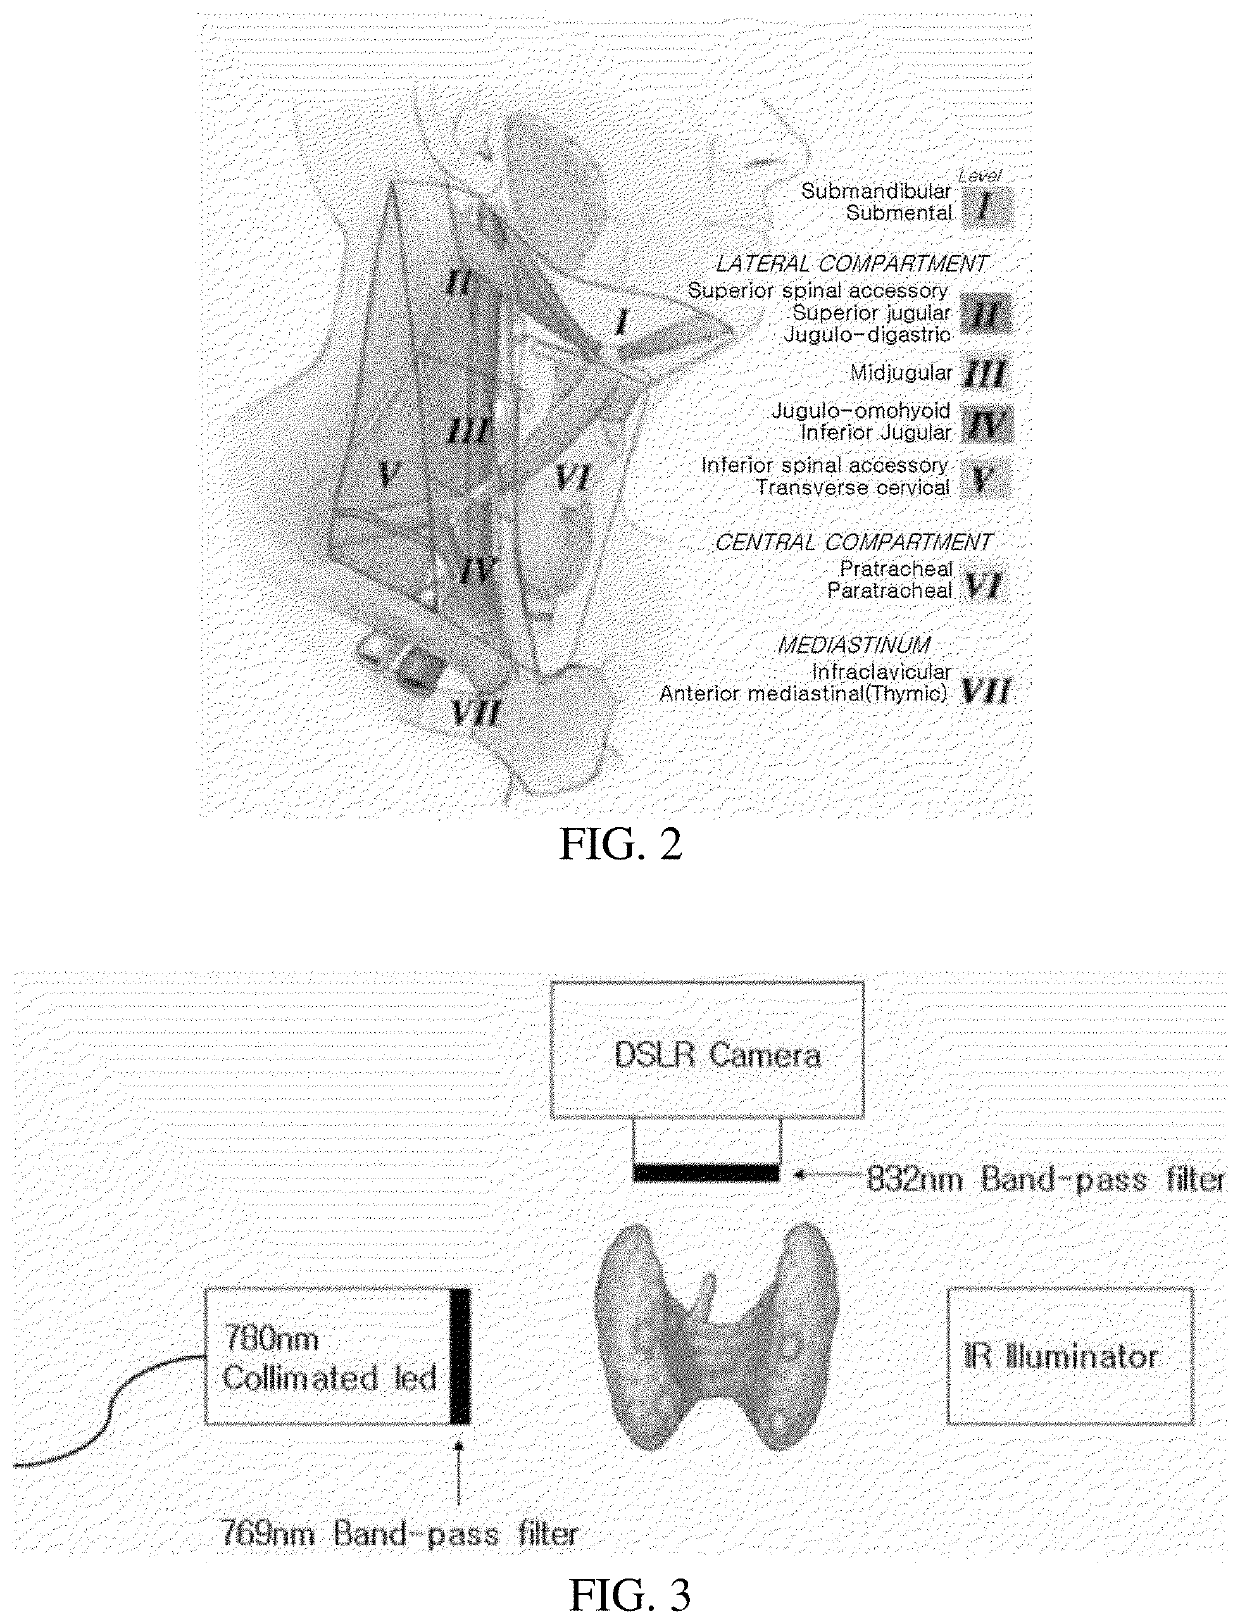 Real-time parathyroid imaging device